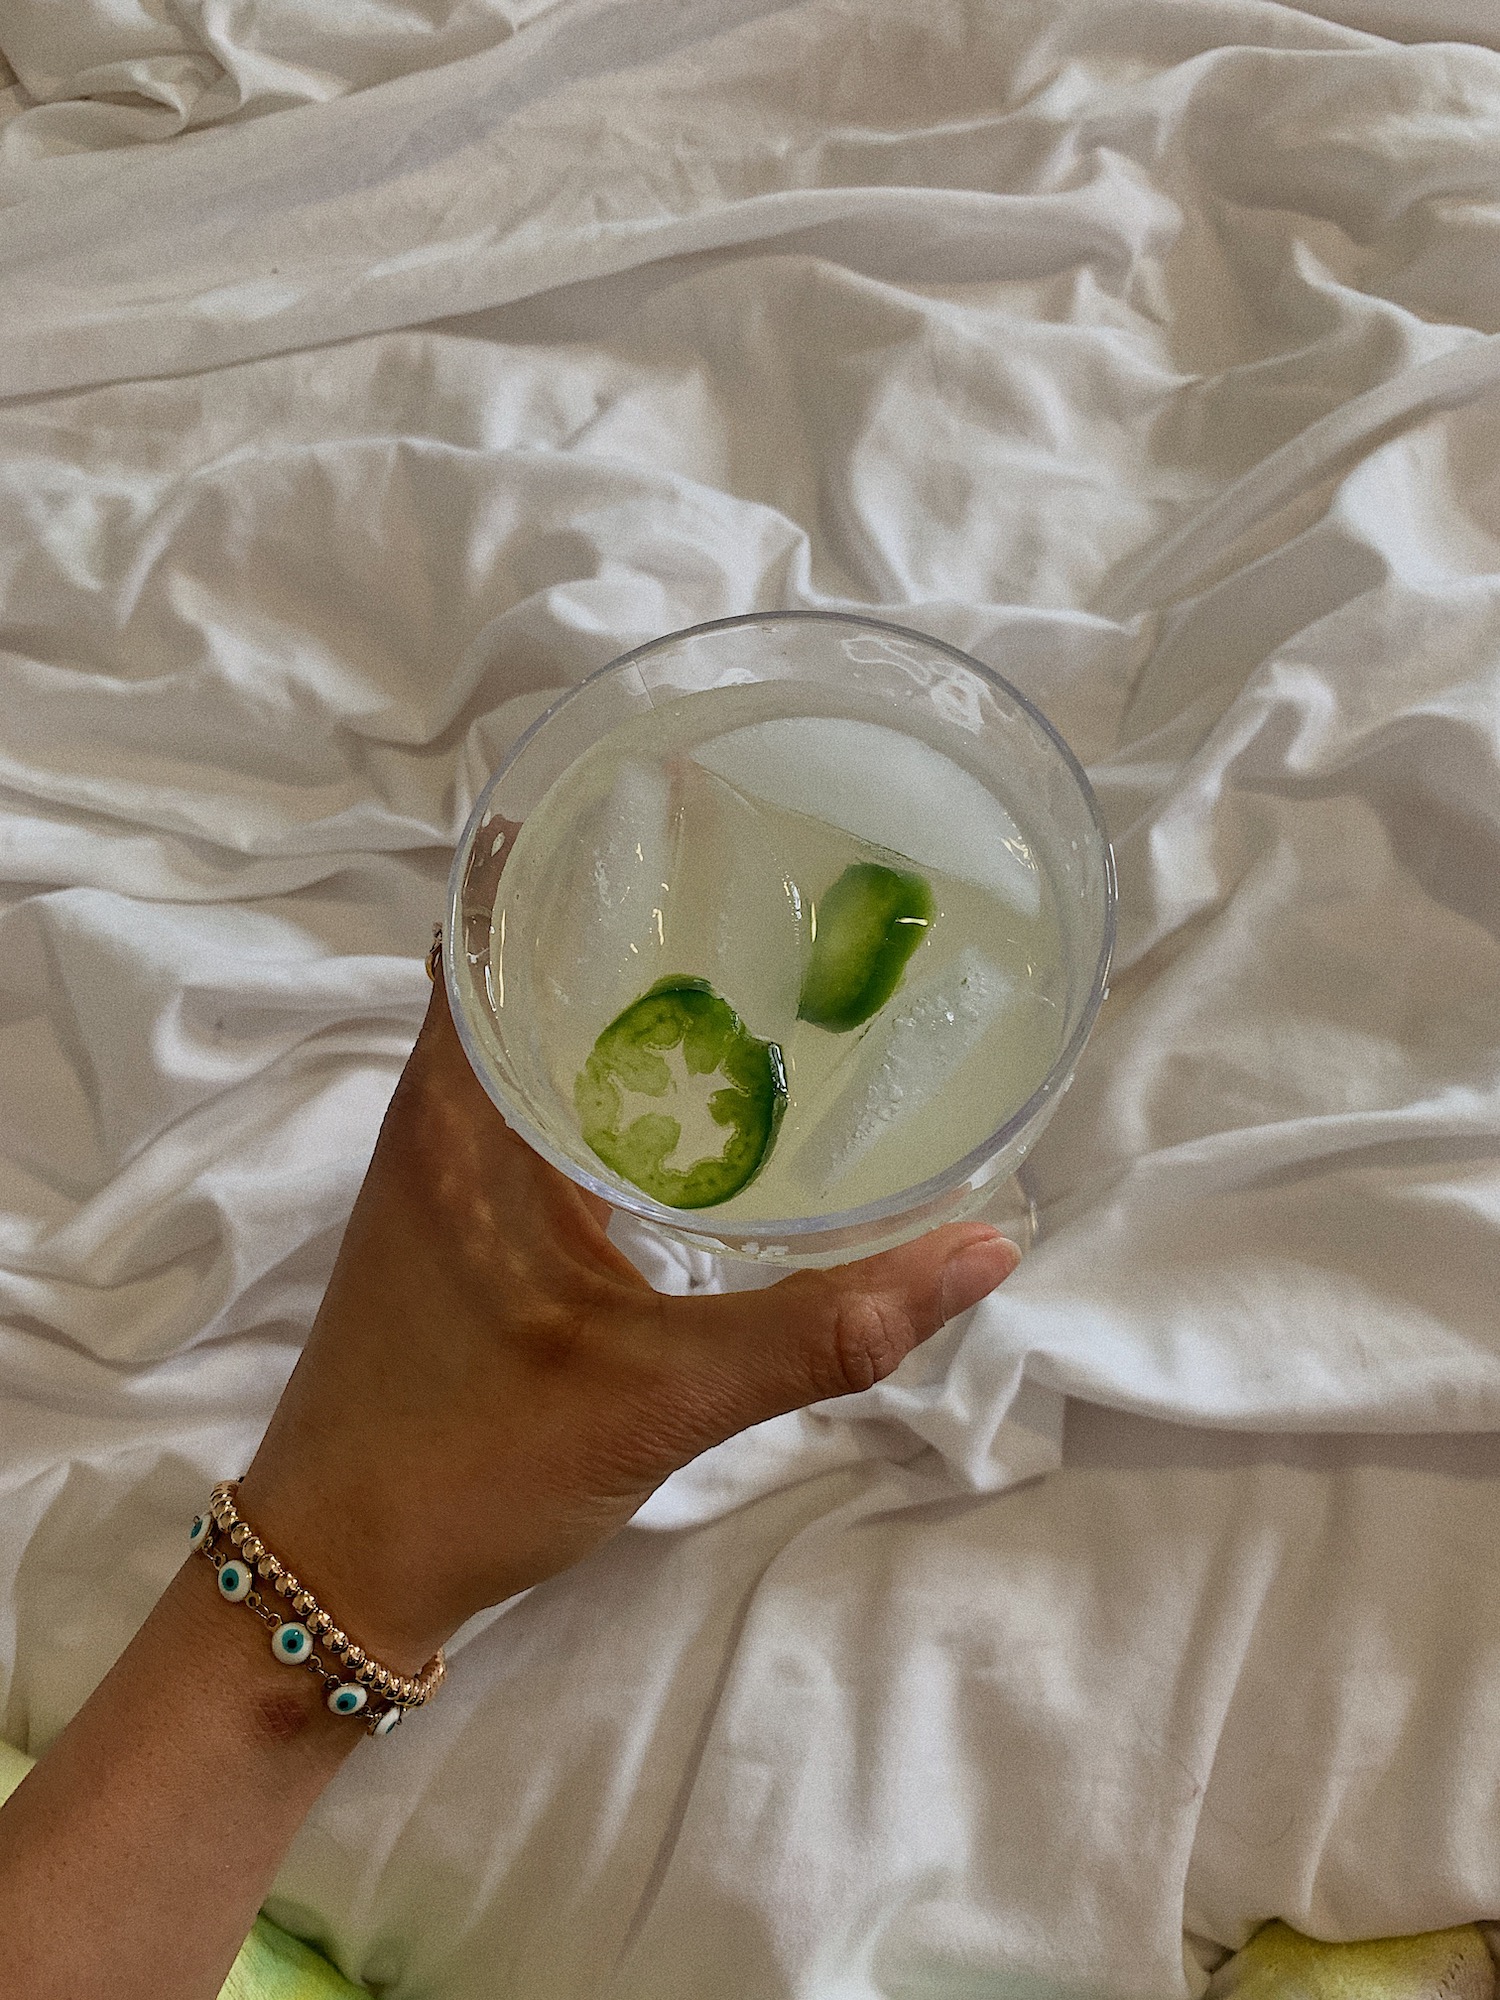 Prosecco Margarita Cocktail Recipe - From Nee, To You